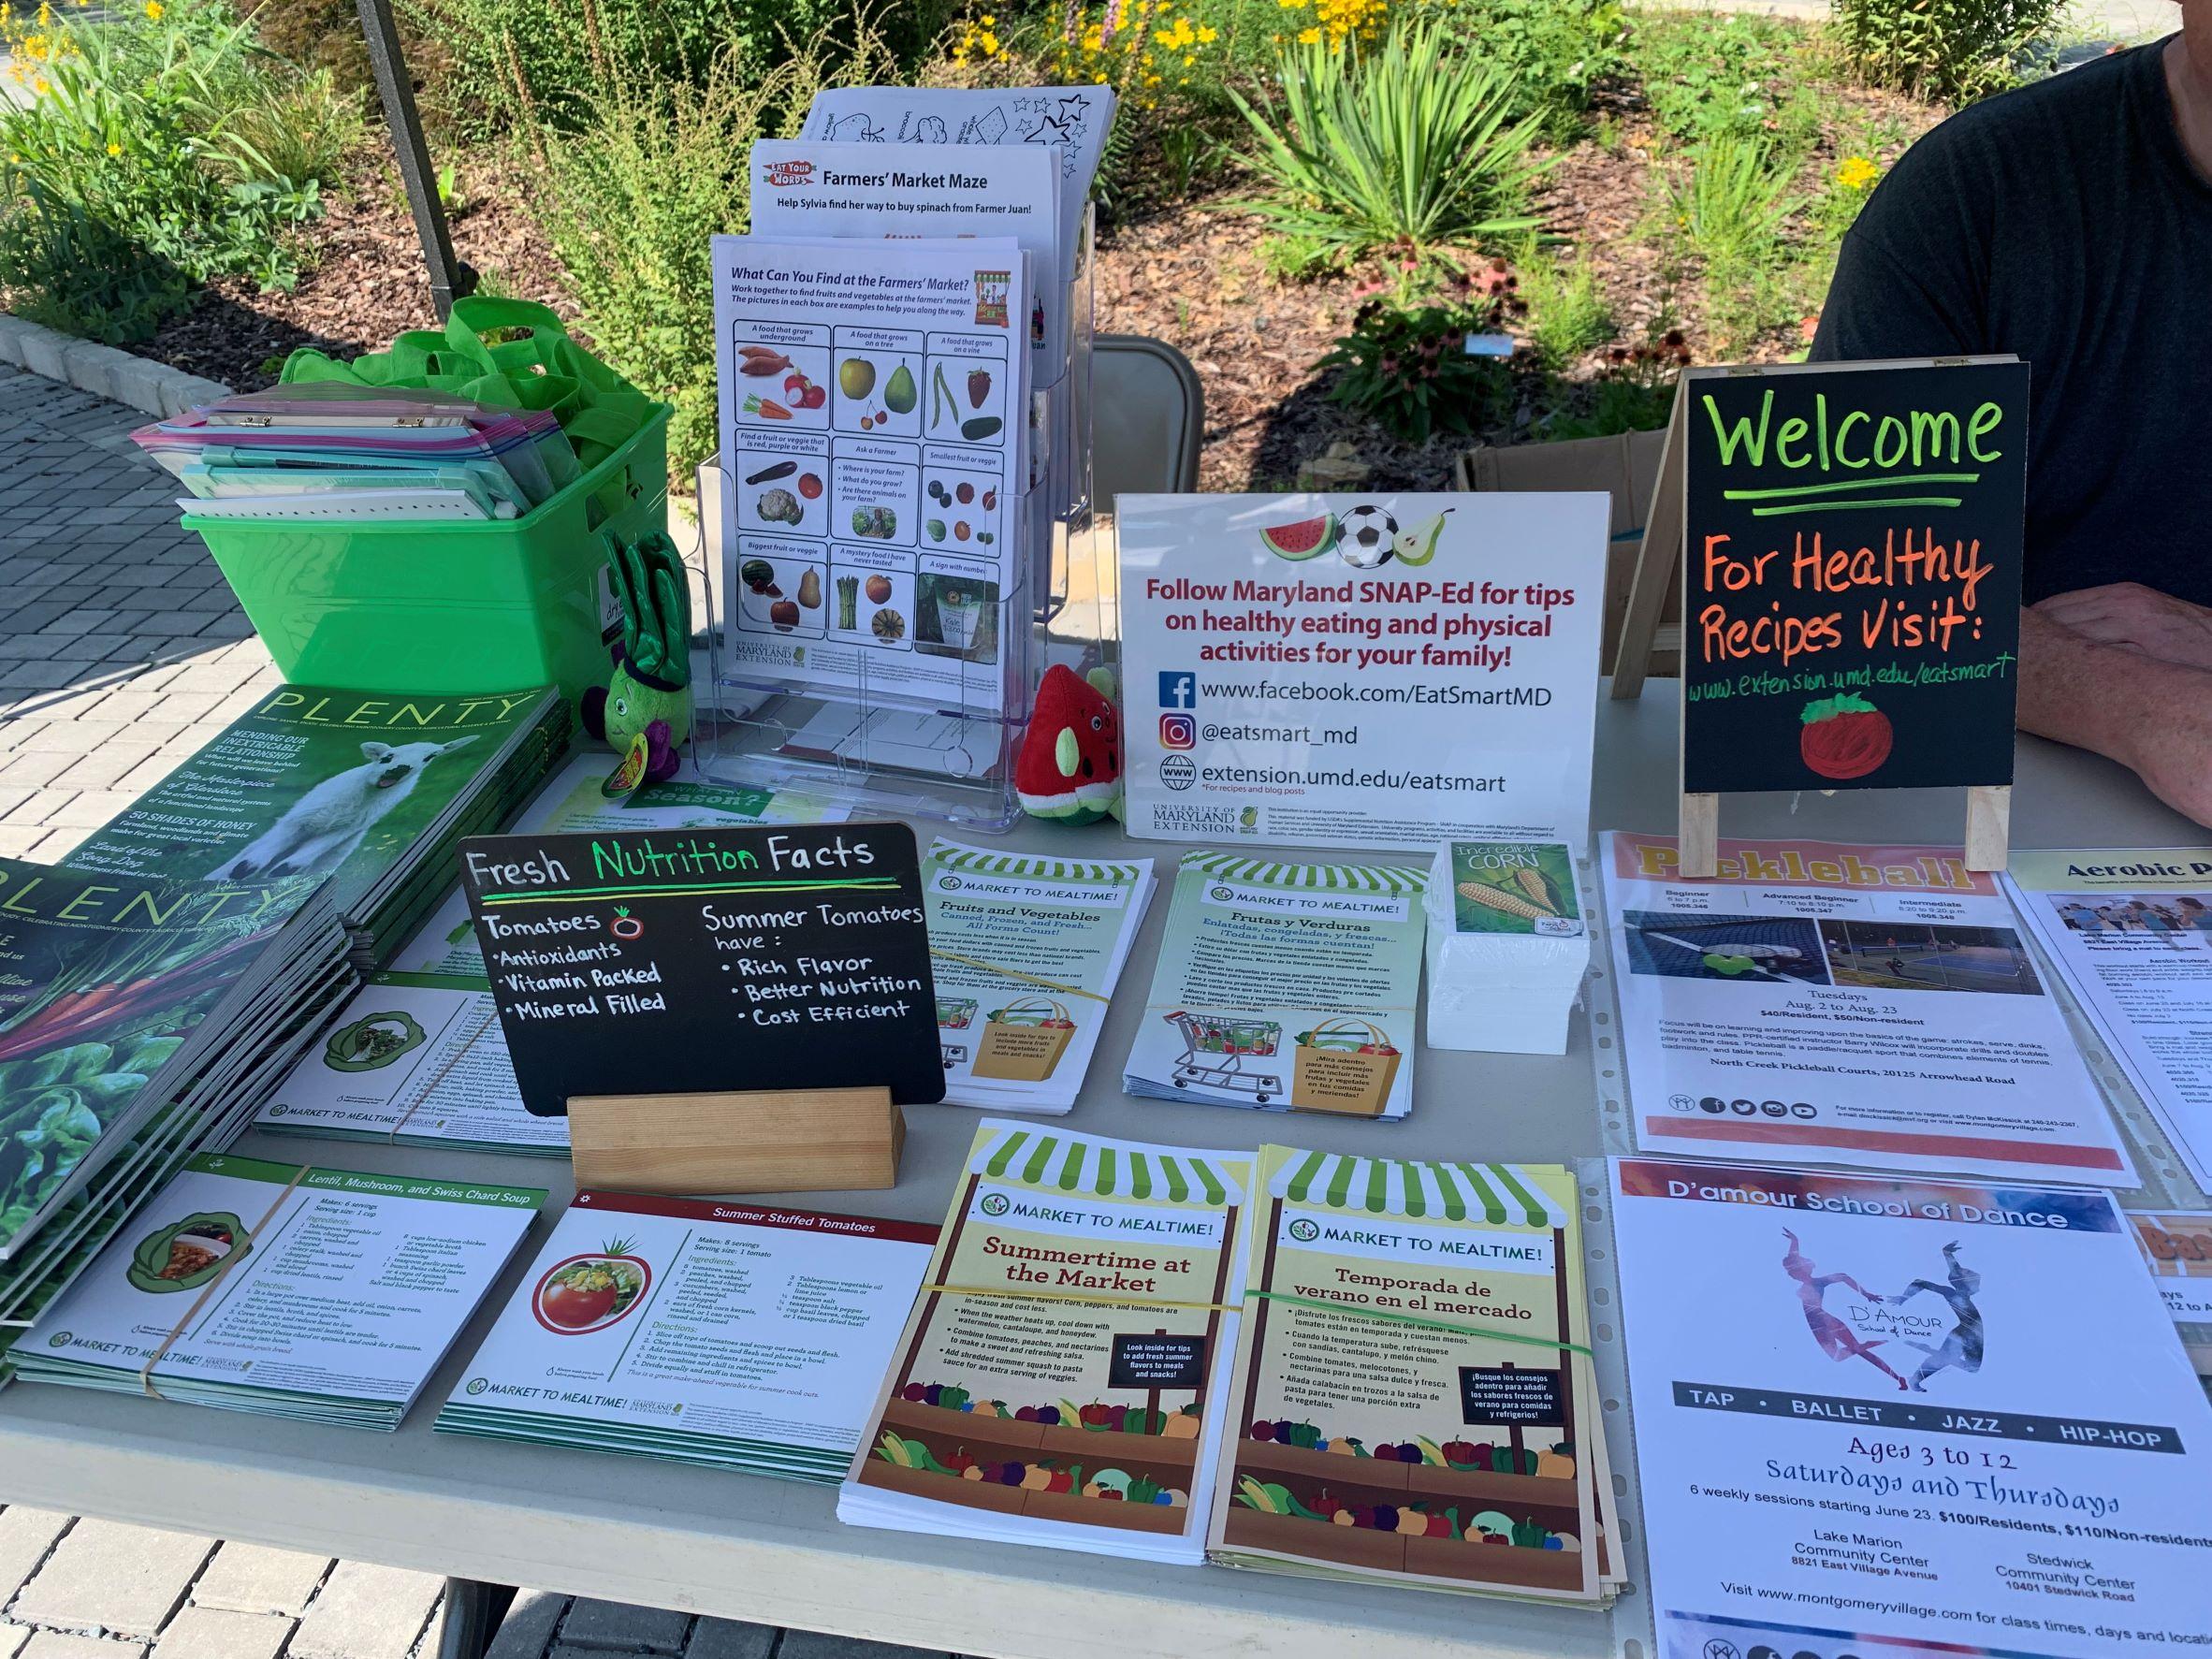 A variety of SNAP-Ed resources set up a farmers market for participants to pick up.